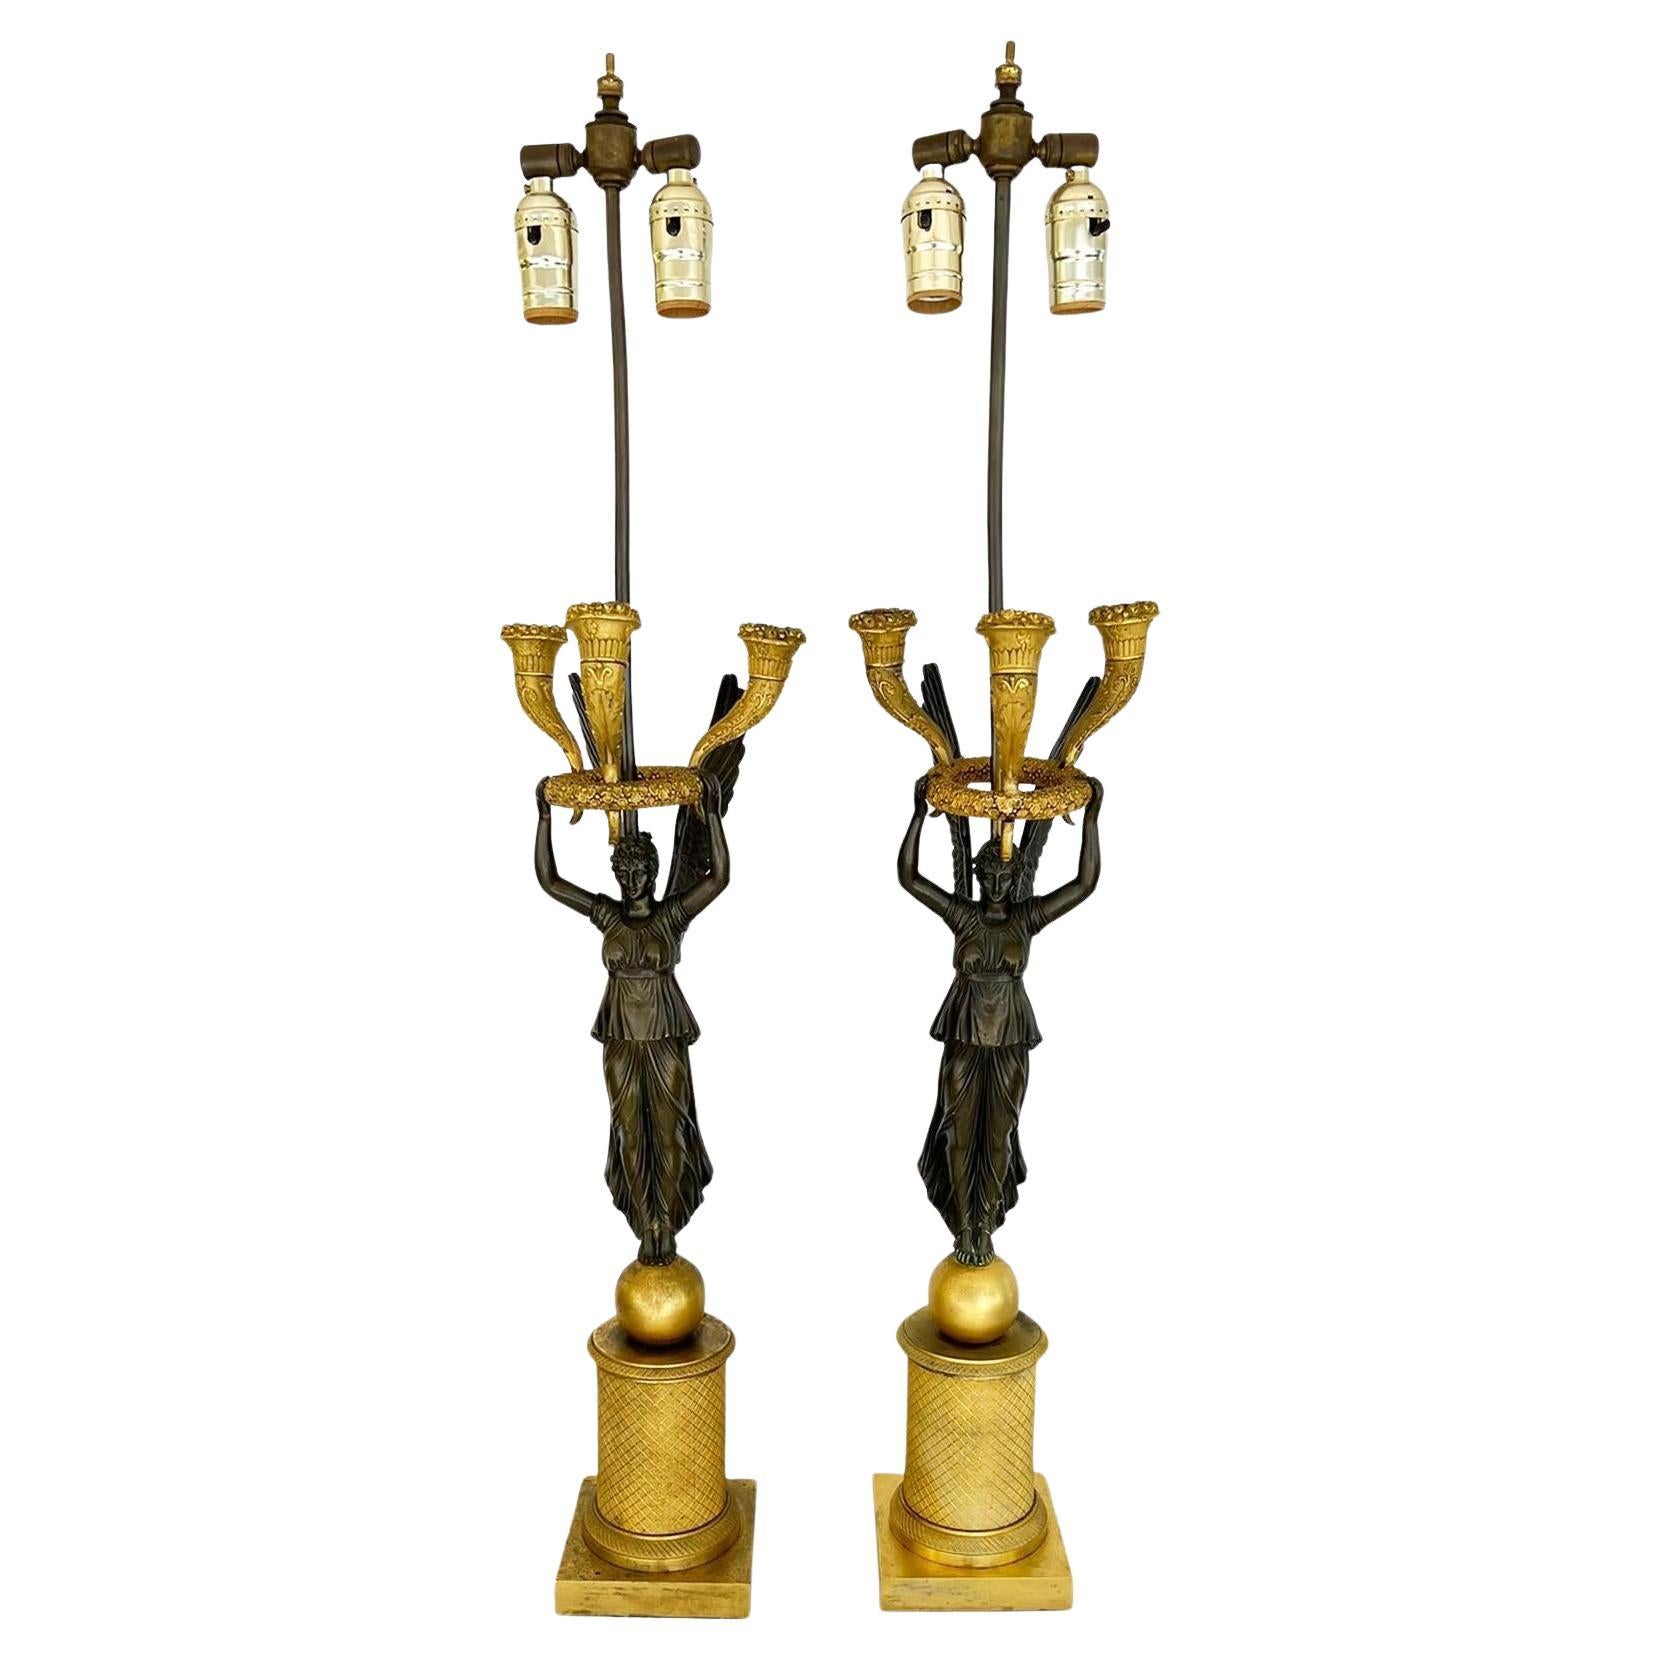 Pair of Late Empire Ormolu and Patented Bronze Figural Candelabra Lamps, C. 1815 For Sale